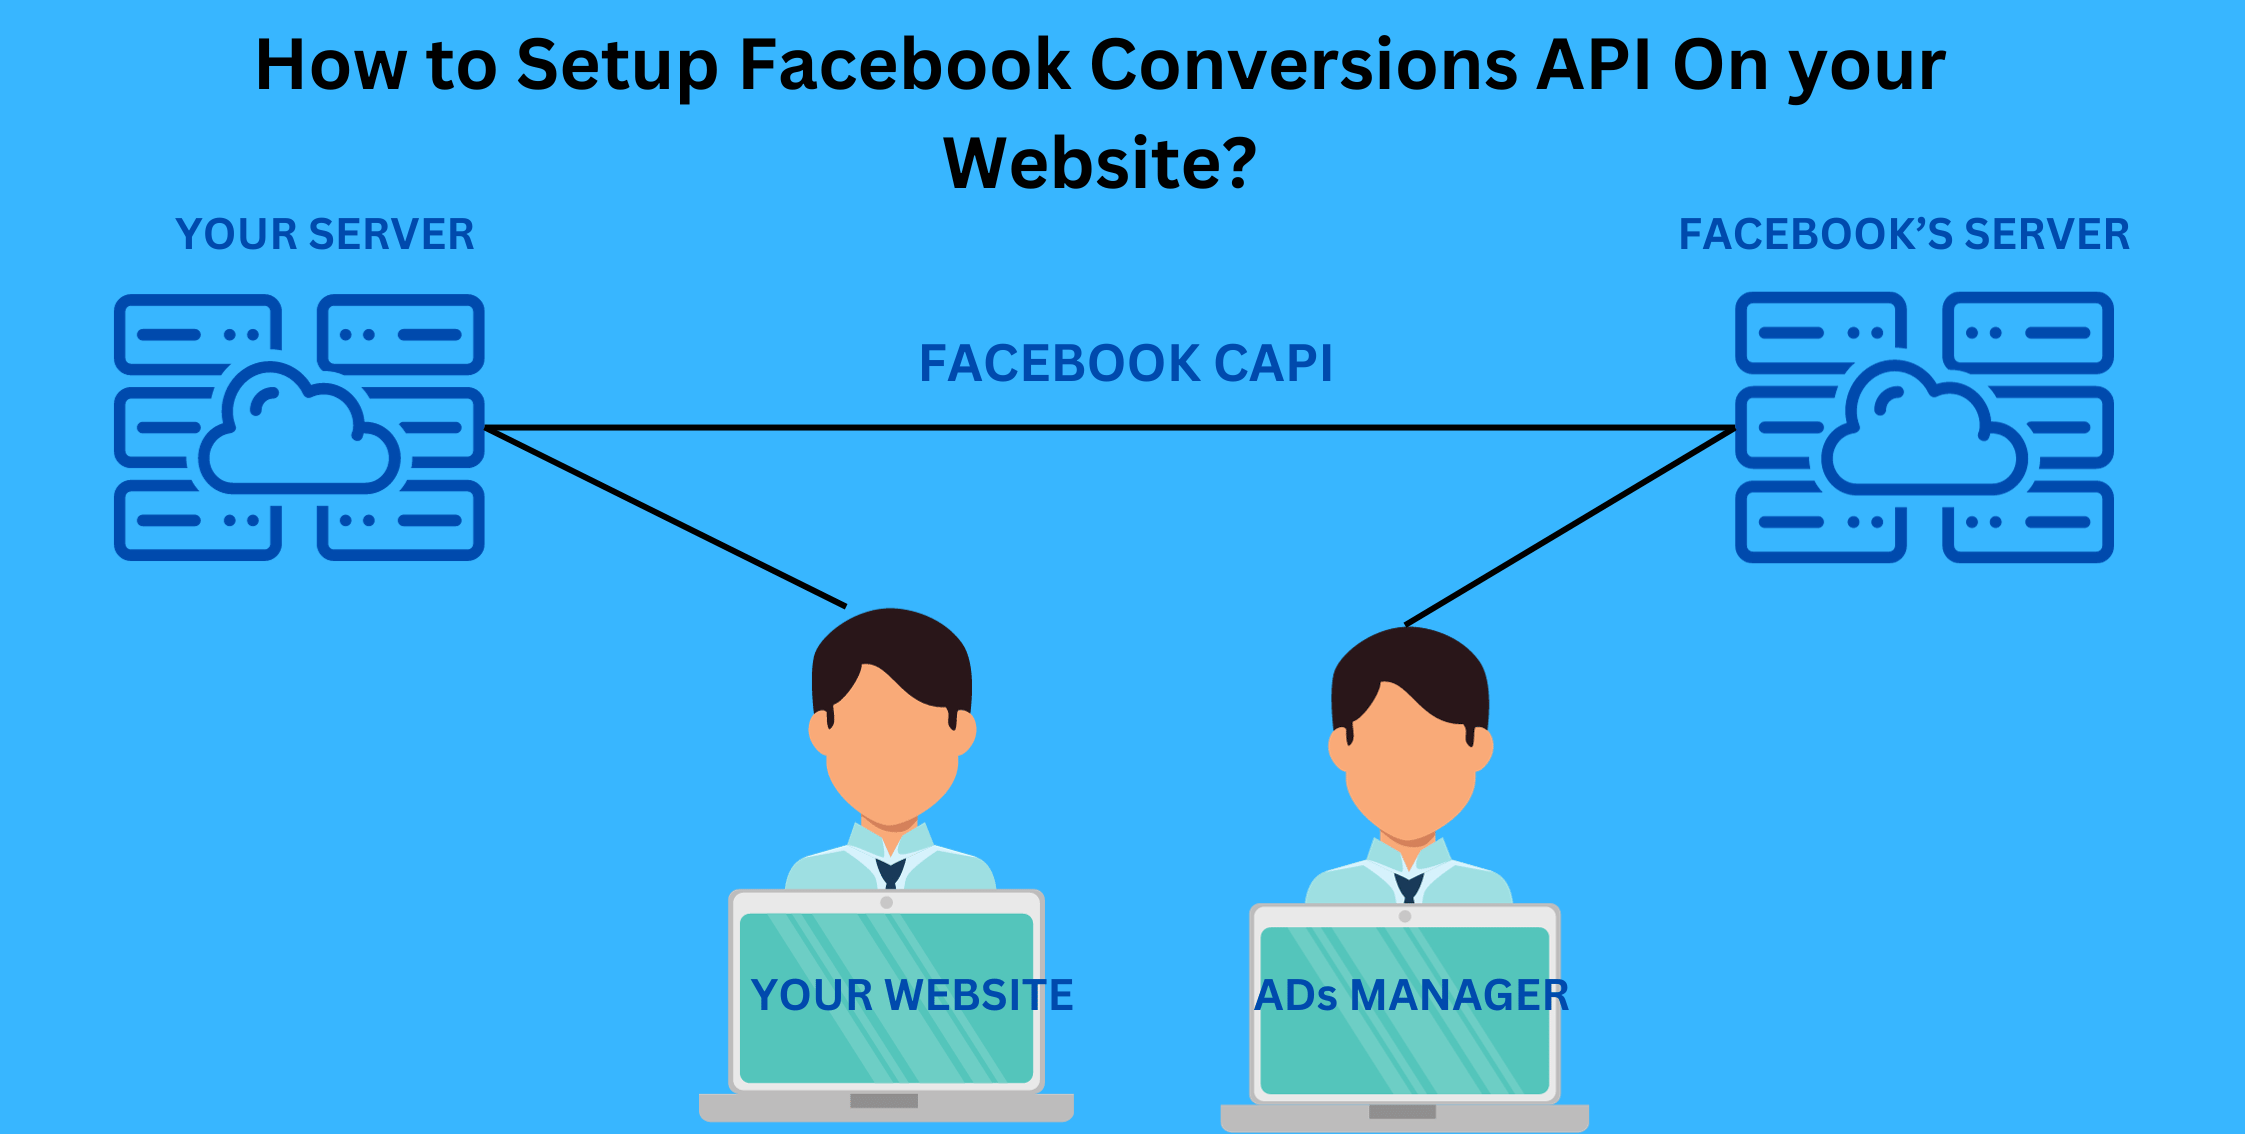 How To Setup Facebook Conversions API On your Website?